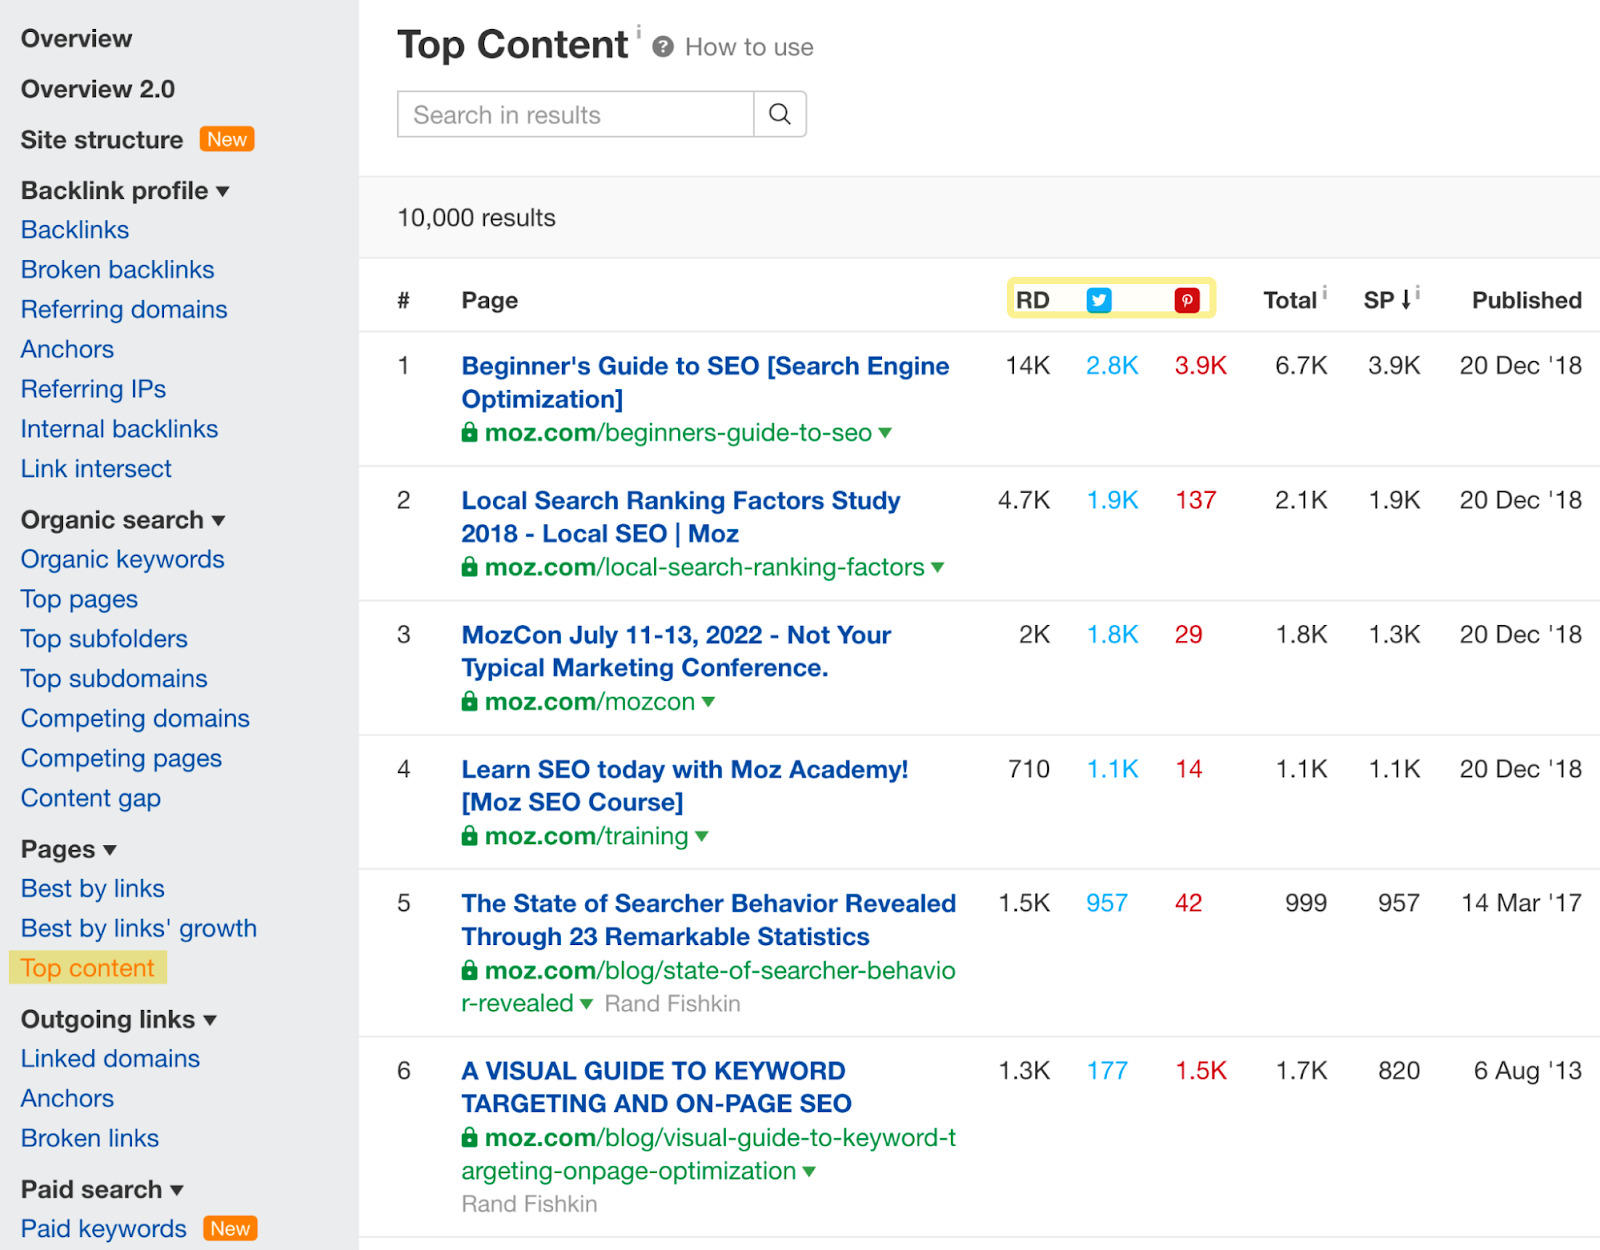 Top Content report results